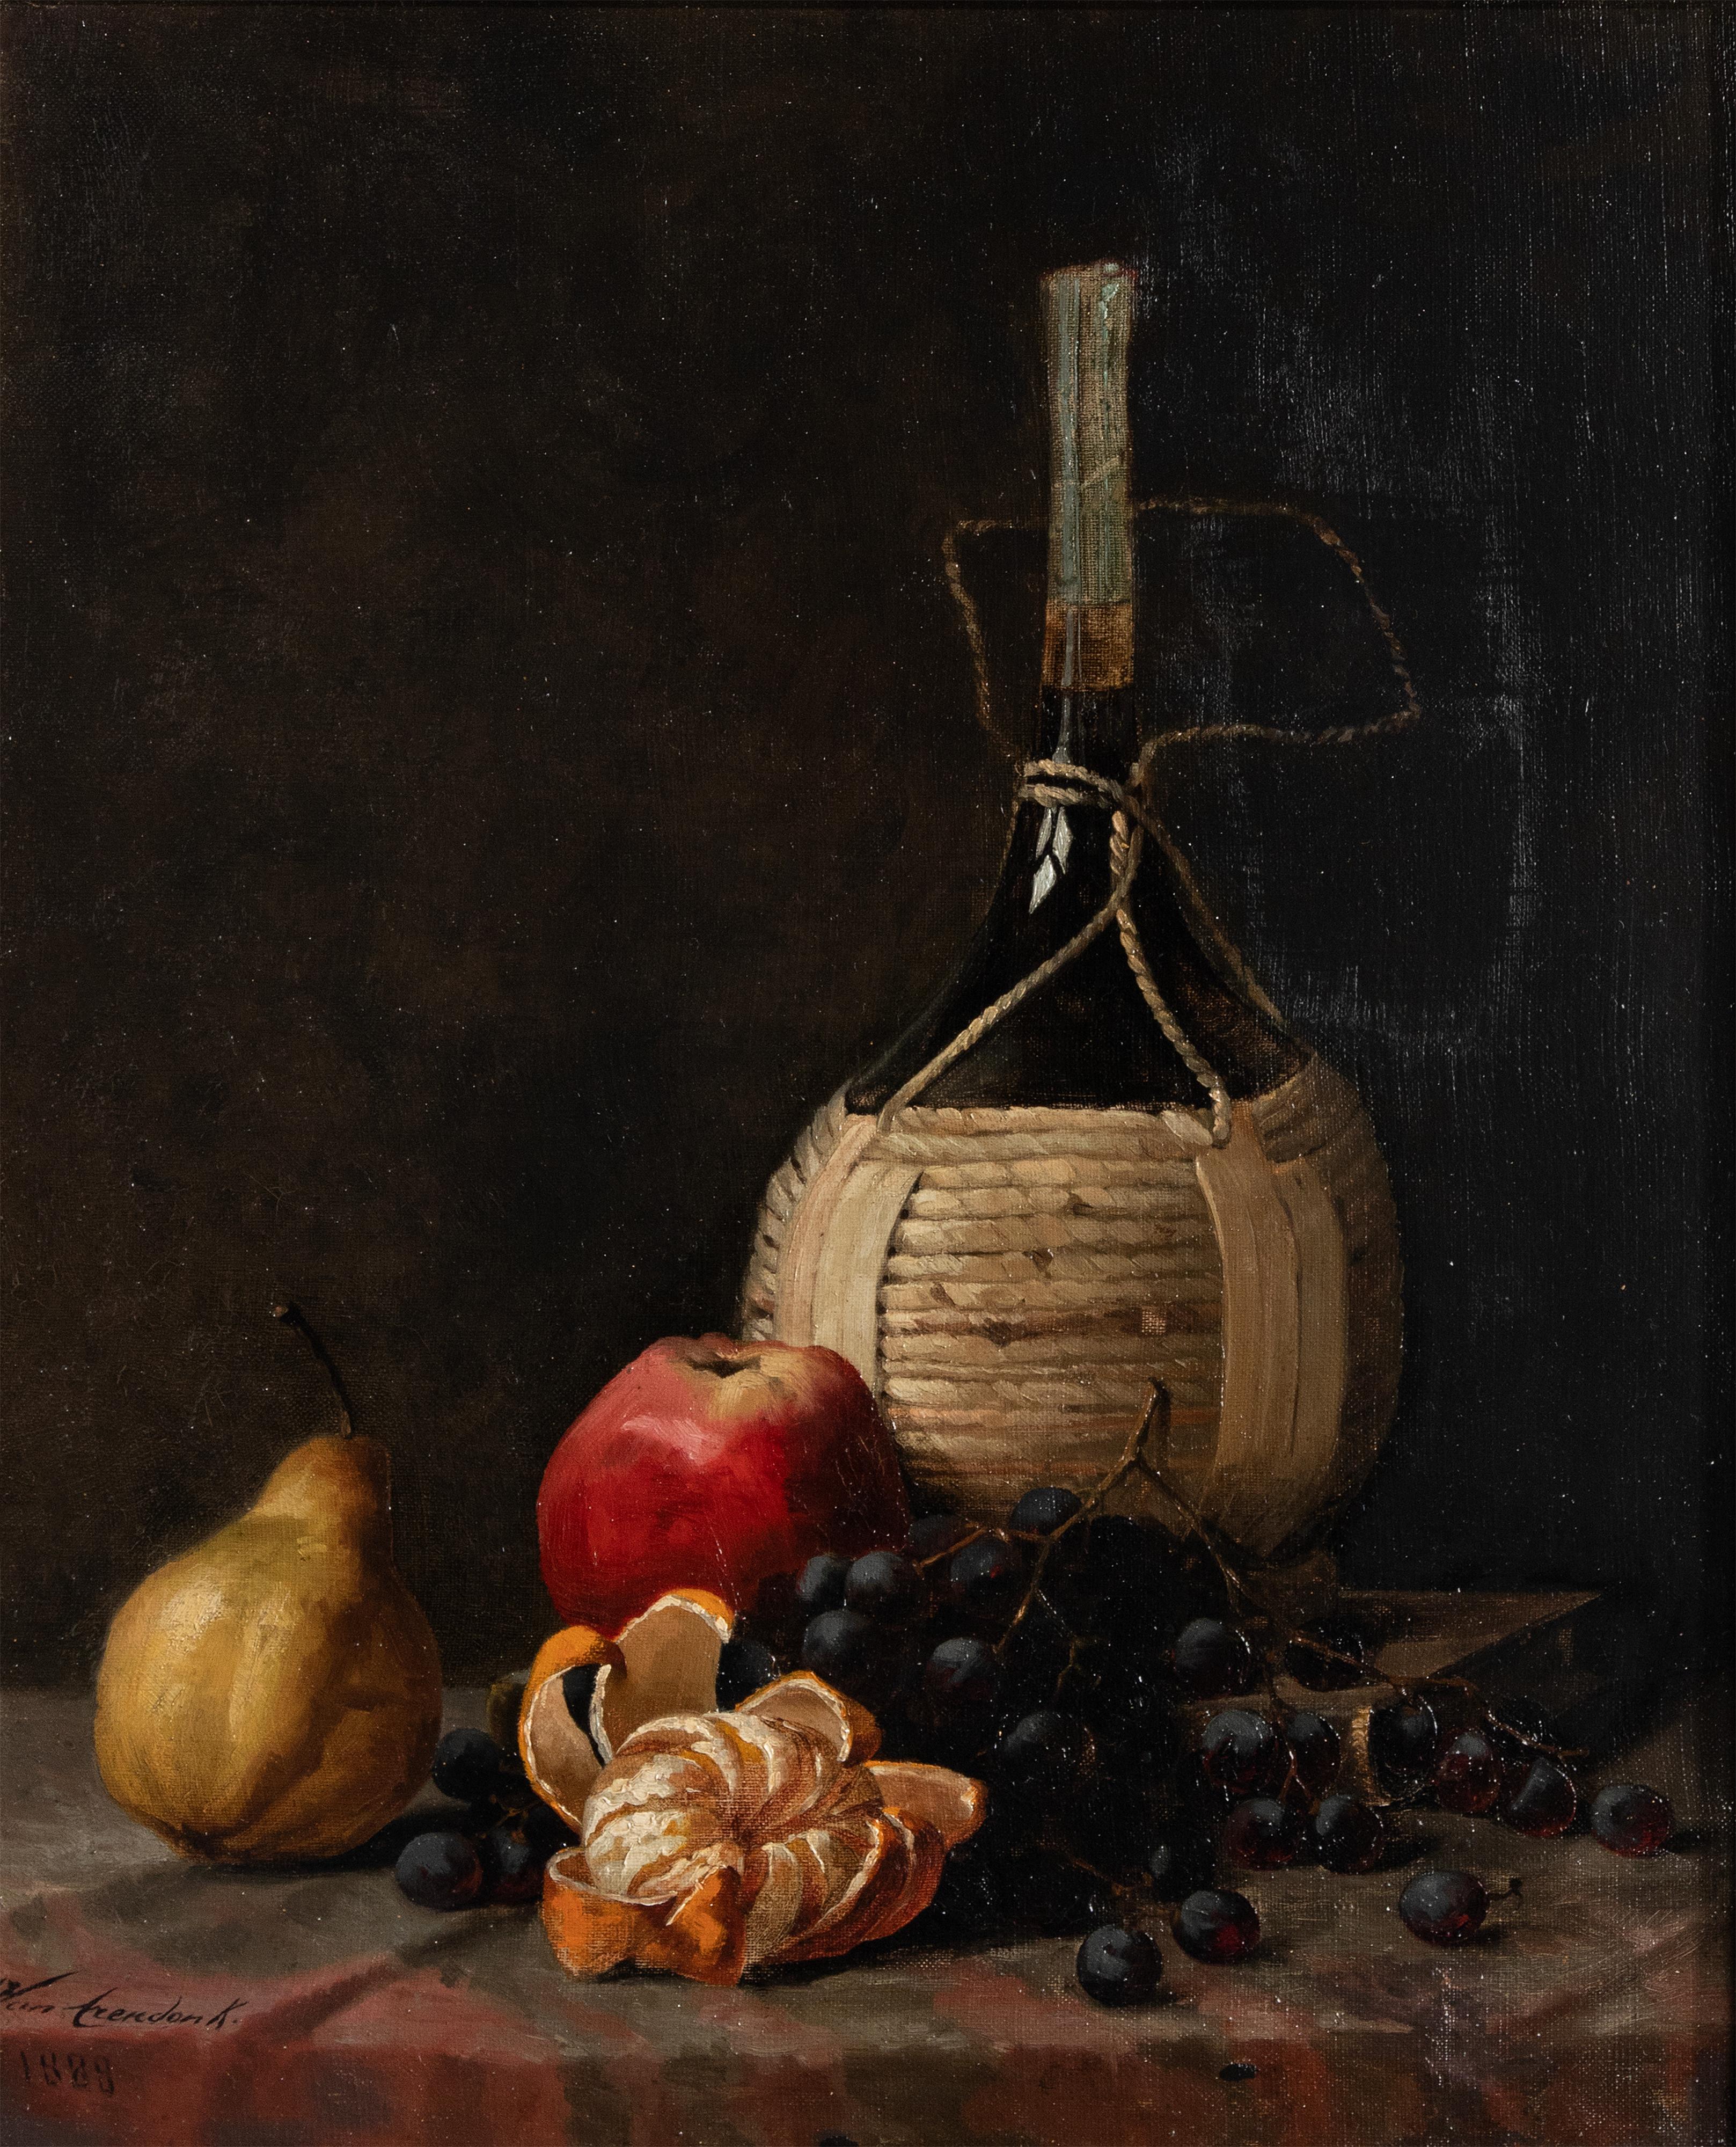 An antique still life oil painting with fruit, pear, apple, grapes and peeled mandarin. In the background a wine bottle. The painting is signed and dated lower left' Van Arendonk, 1884. The frame is made of gesso on a wooden frame.
Point of